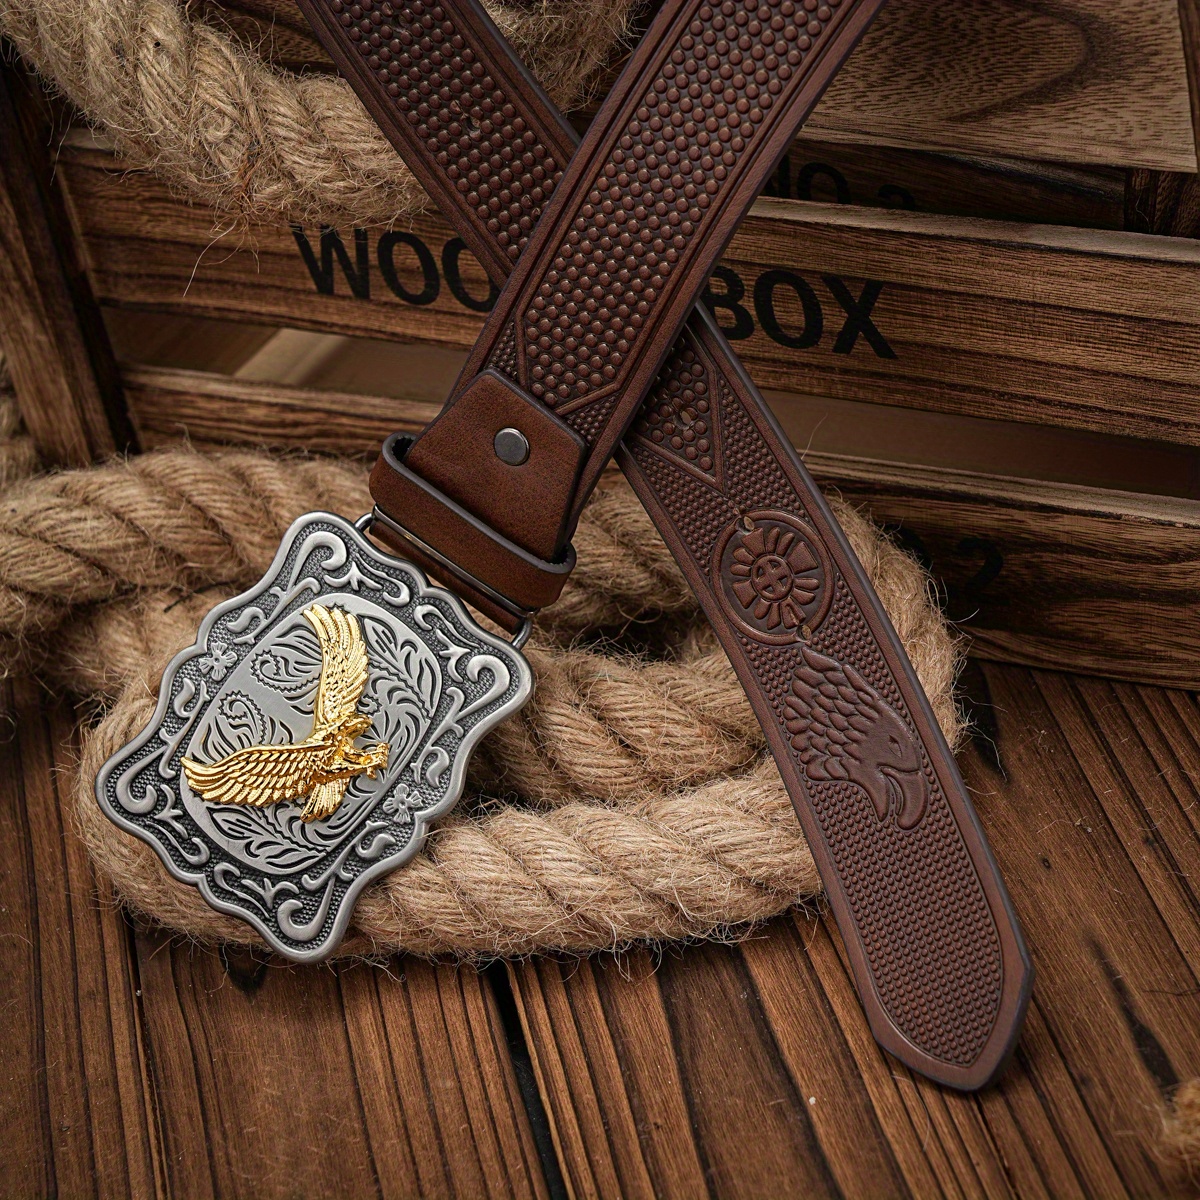 Luxury Men's Leather Belt, Fashion Casual Belt With Buckle For Jeans,  Business Gifts For Men - Temu Romania